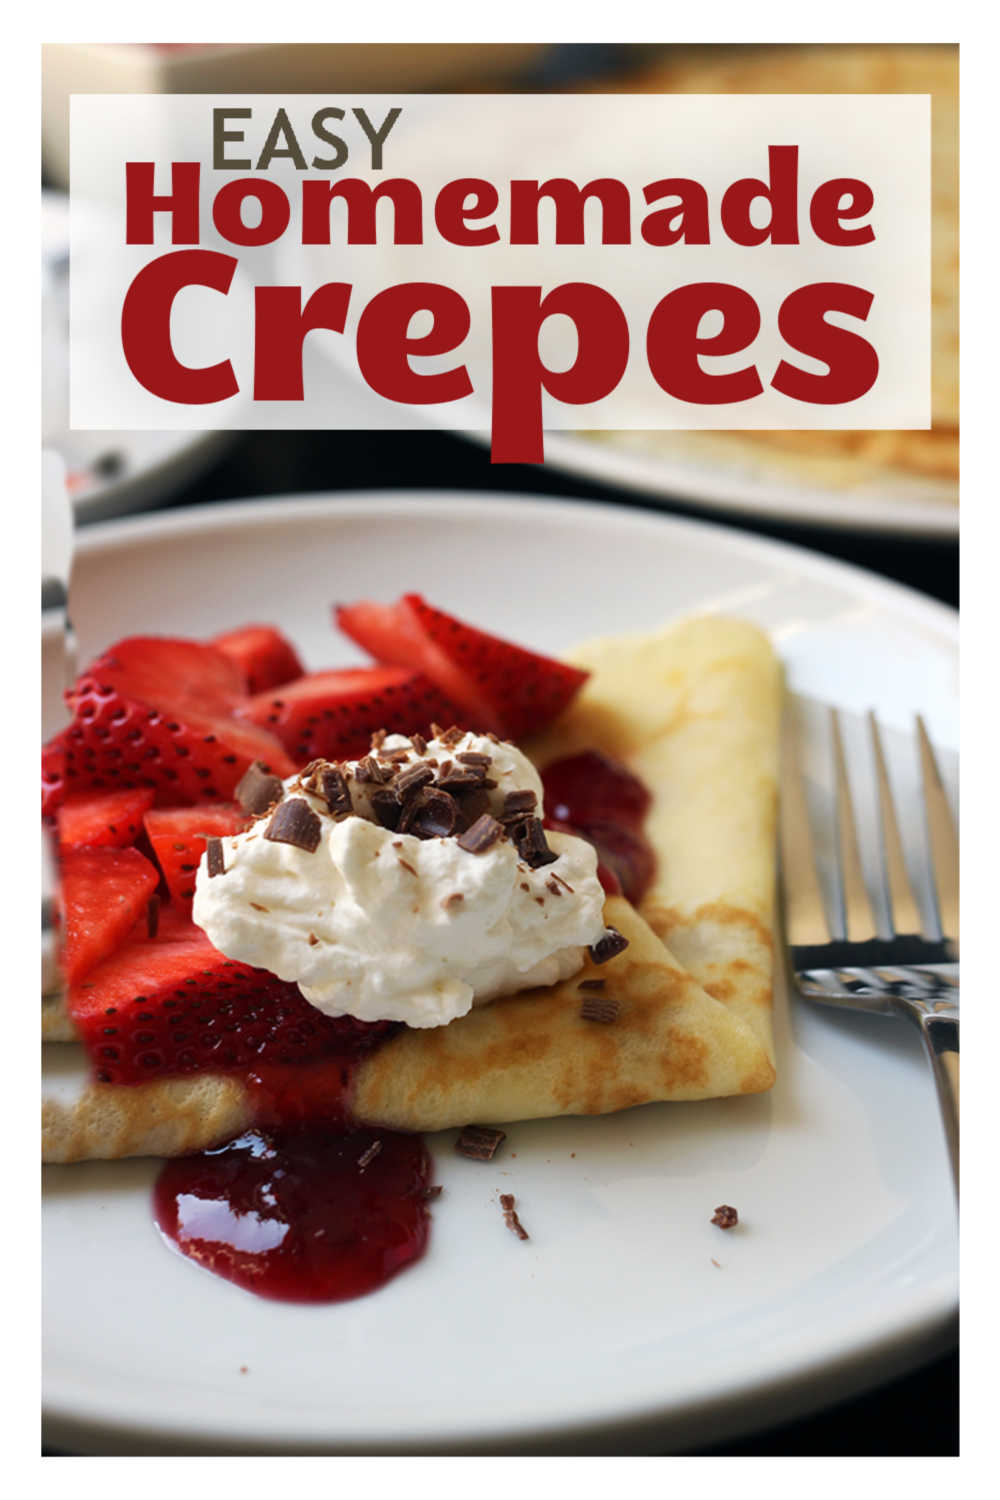 A folded crepe on a plate with cream and berries